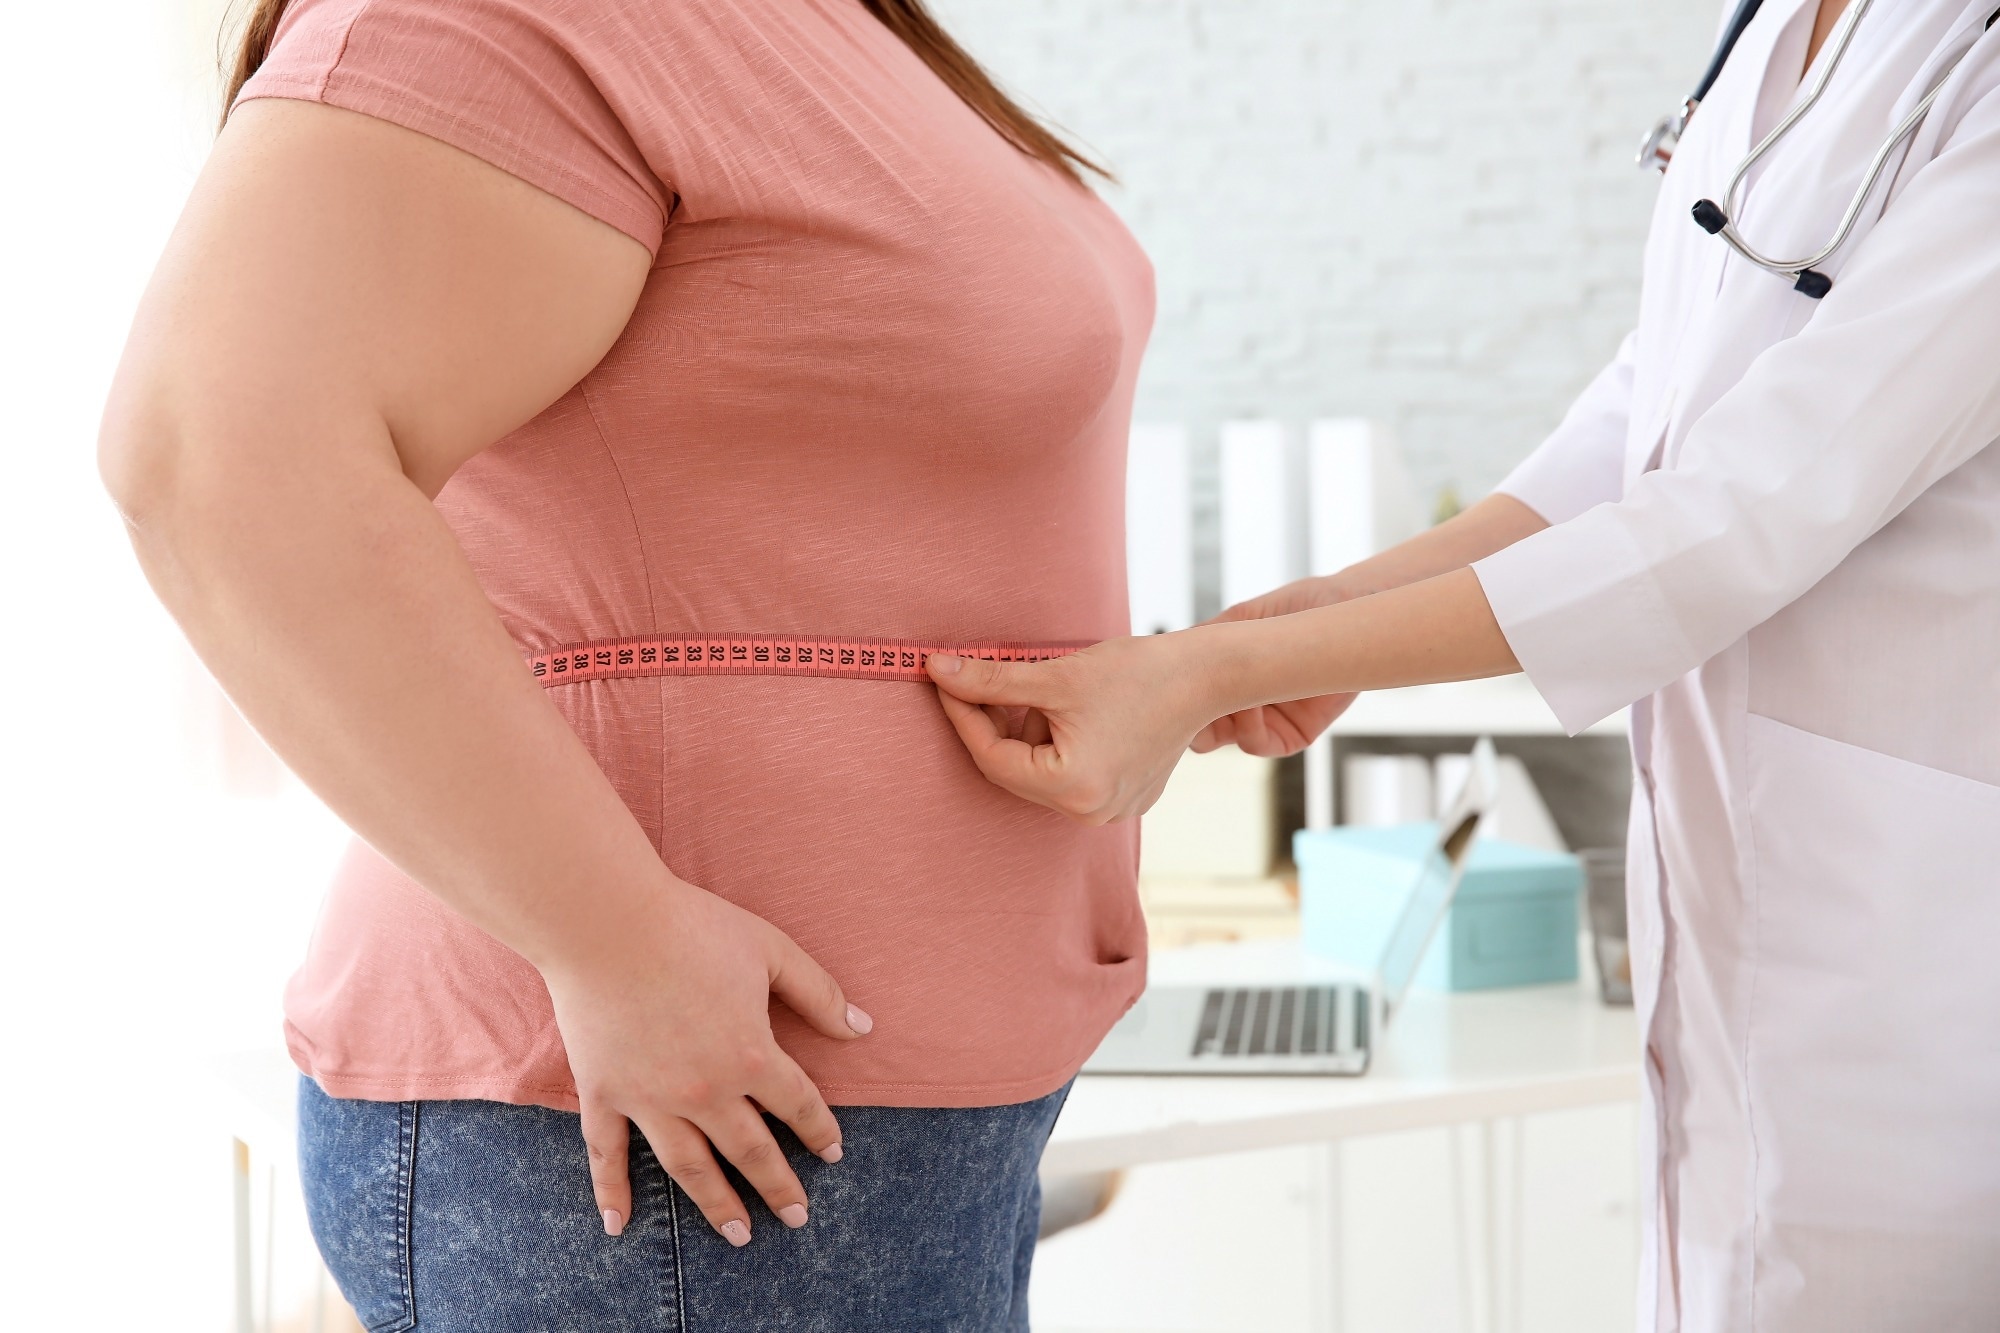 Study: What advice do general practitioners give to people living with obesity to lose weight? A qualitative content analysis of recorded interactions. Image Credit: New Africa/Shutterstock